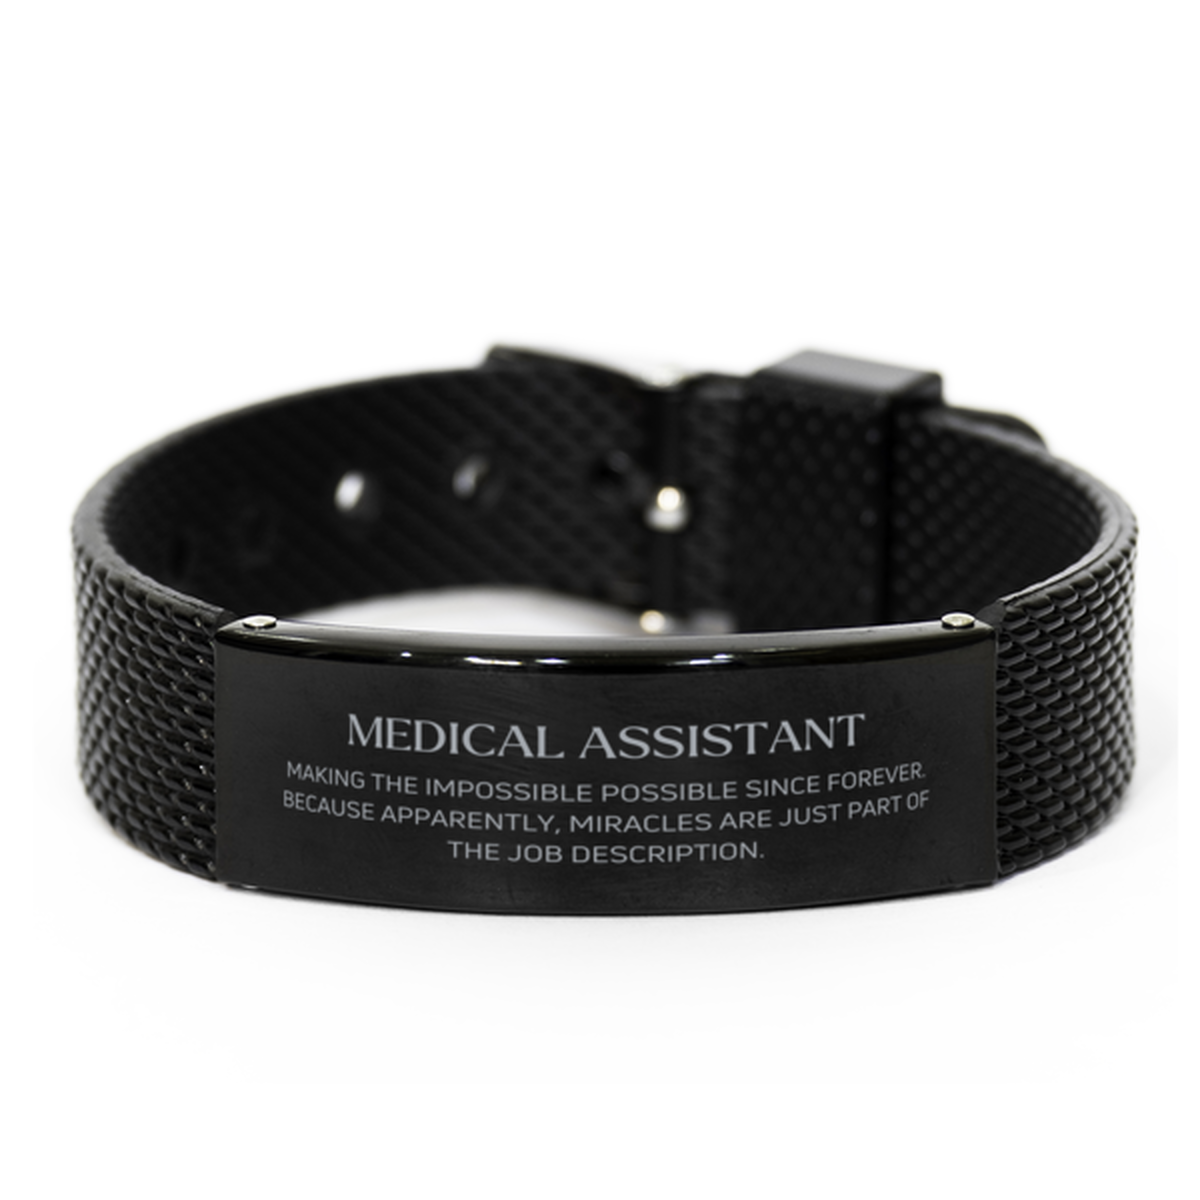 Funny Medical Assistant Gifts, Miracles are just part of the job description, Inspirational Birthday Black Shark Mesh Bracelet For Medical Assistant, Men, Women, Coworkers, Friends, Boss